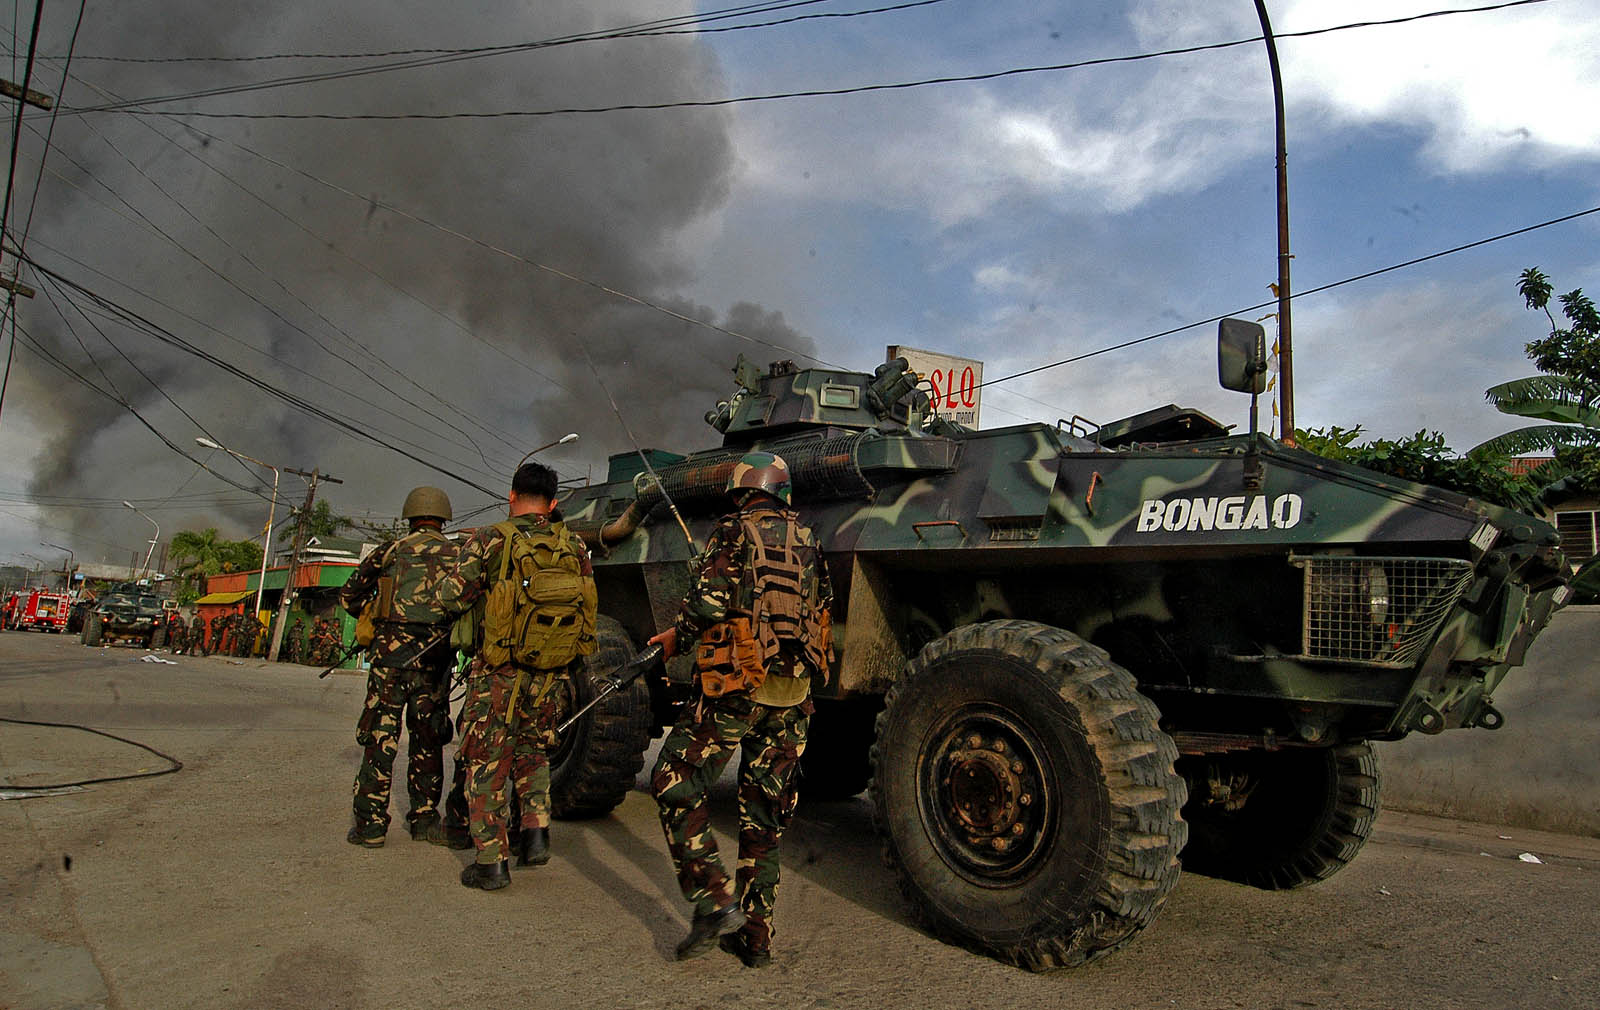 ARMOR COVER. Soldiers used the cover behind a Simba tank as they cross a street filled with rebel snipers in Evangelista Street, Barangay Santa Catalina in Zamboanga City on Thursday, Sept. 12. MindaNews photo by Froilan Gallardo